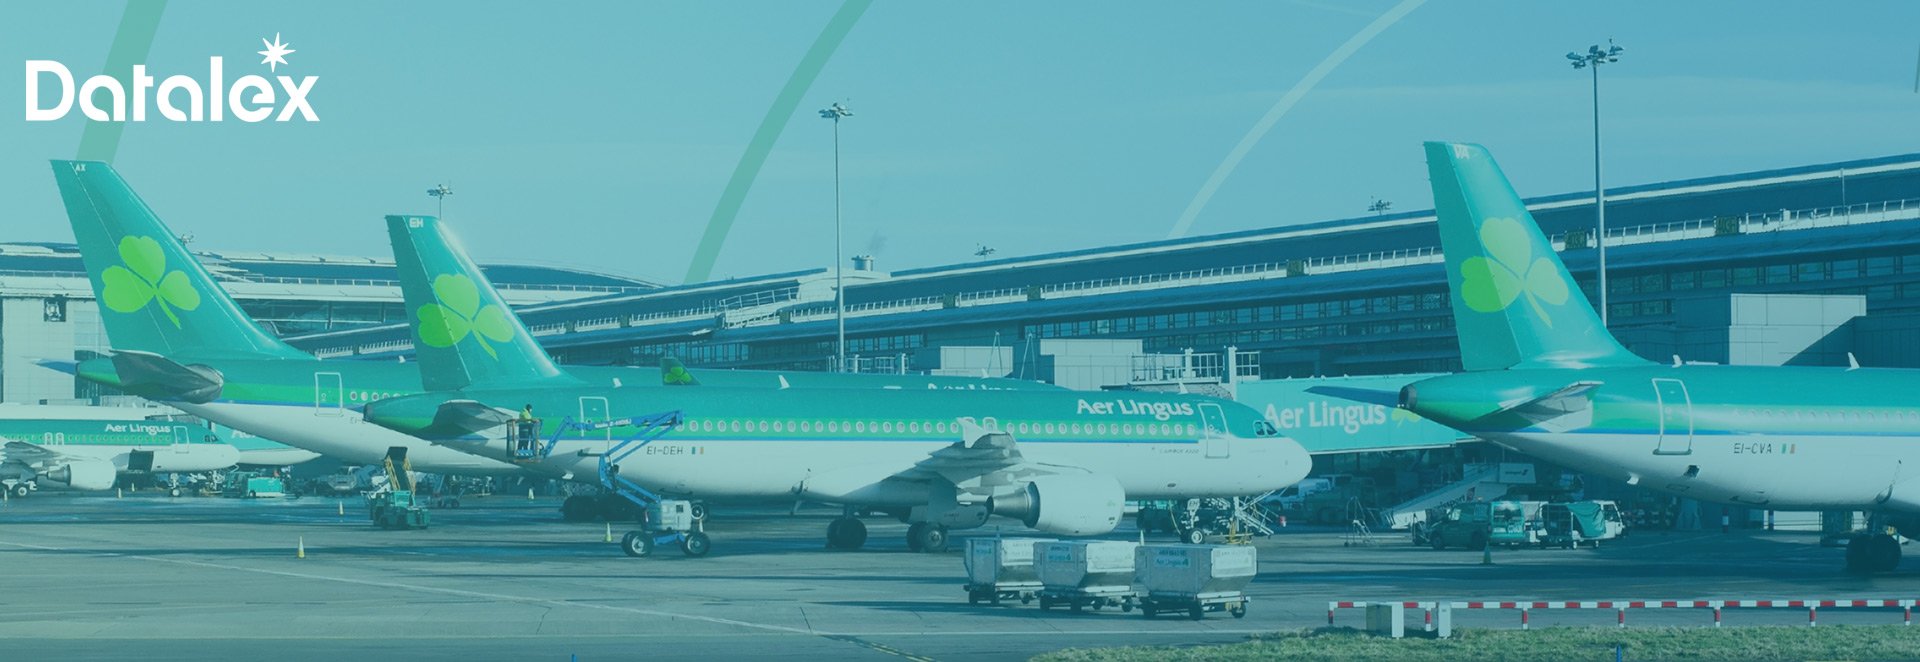 Aer Lingus and Datalex